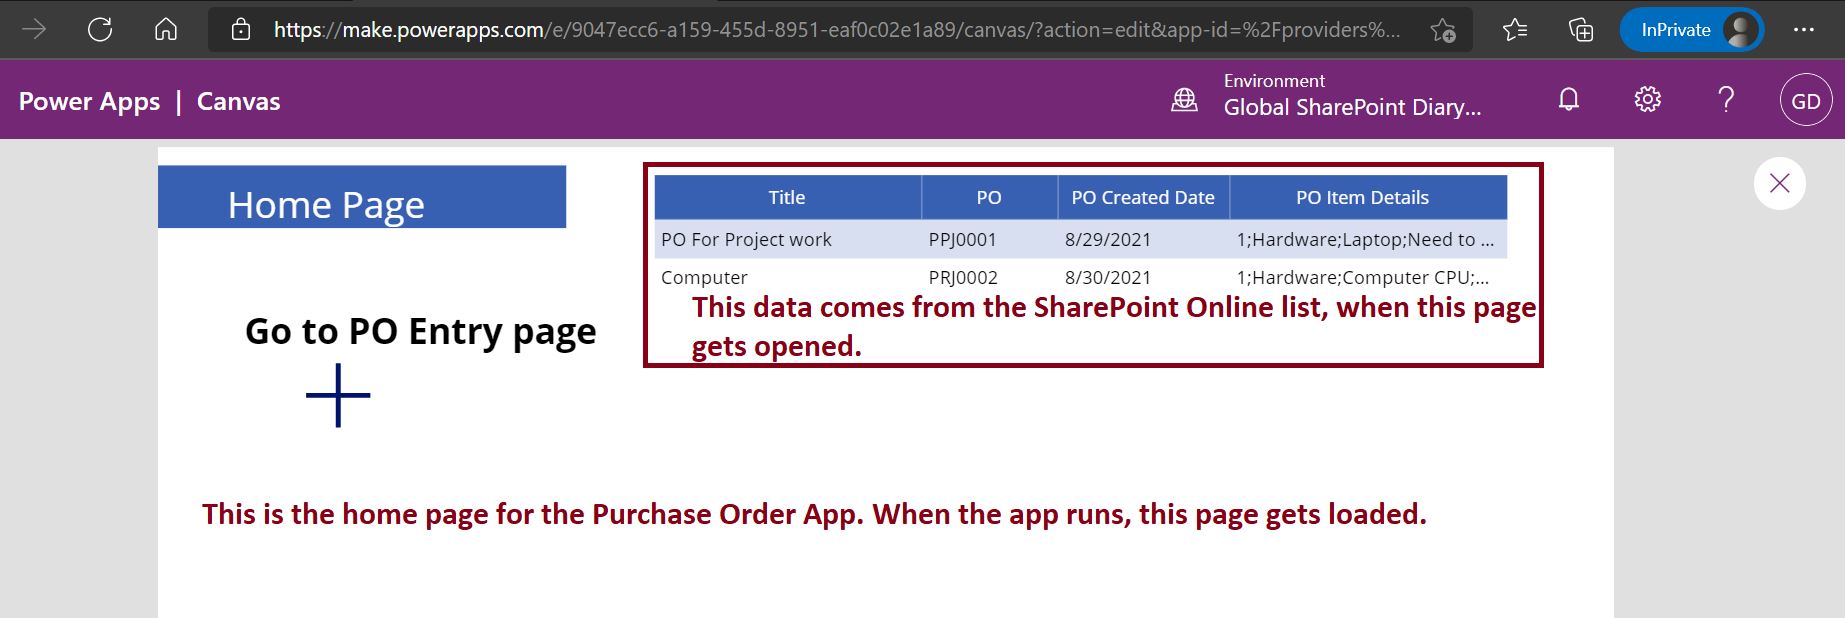 PowerApps repeating section demo home page